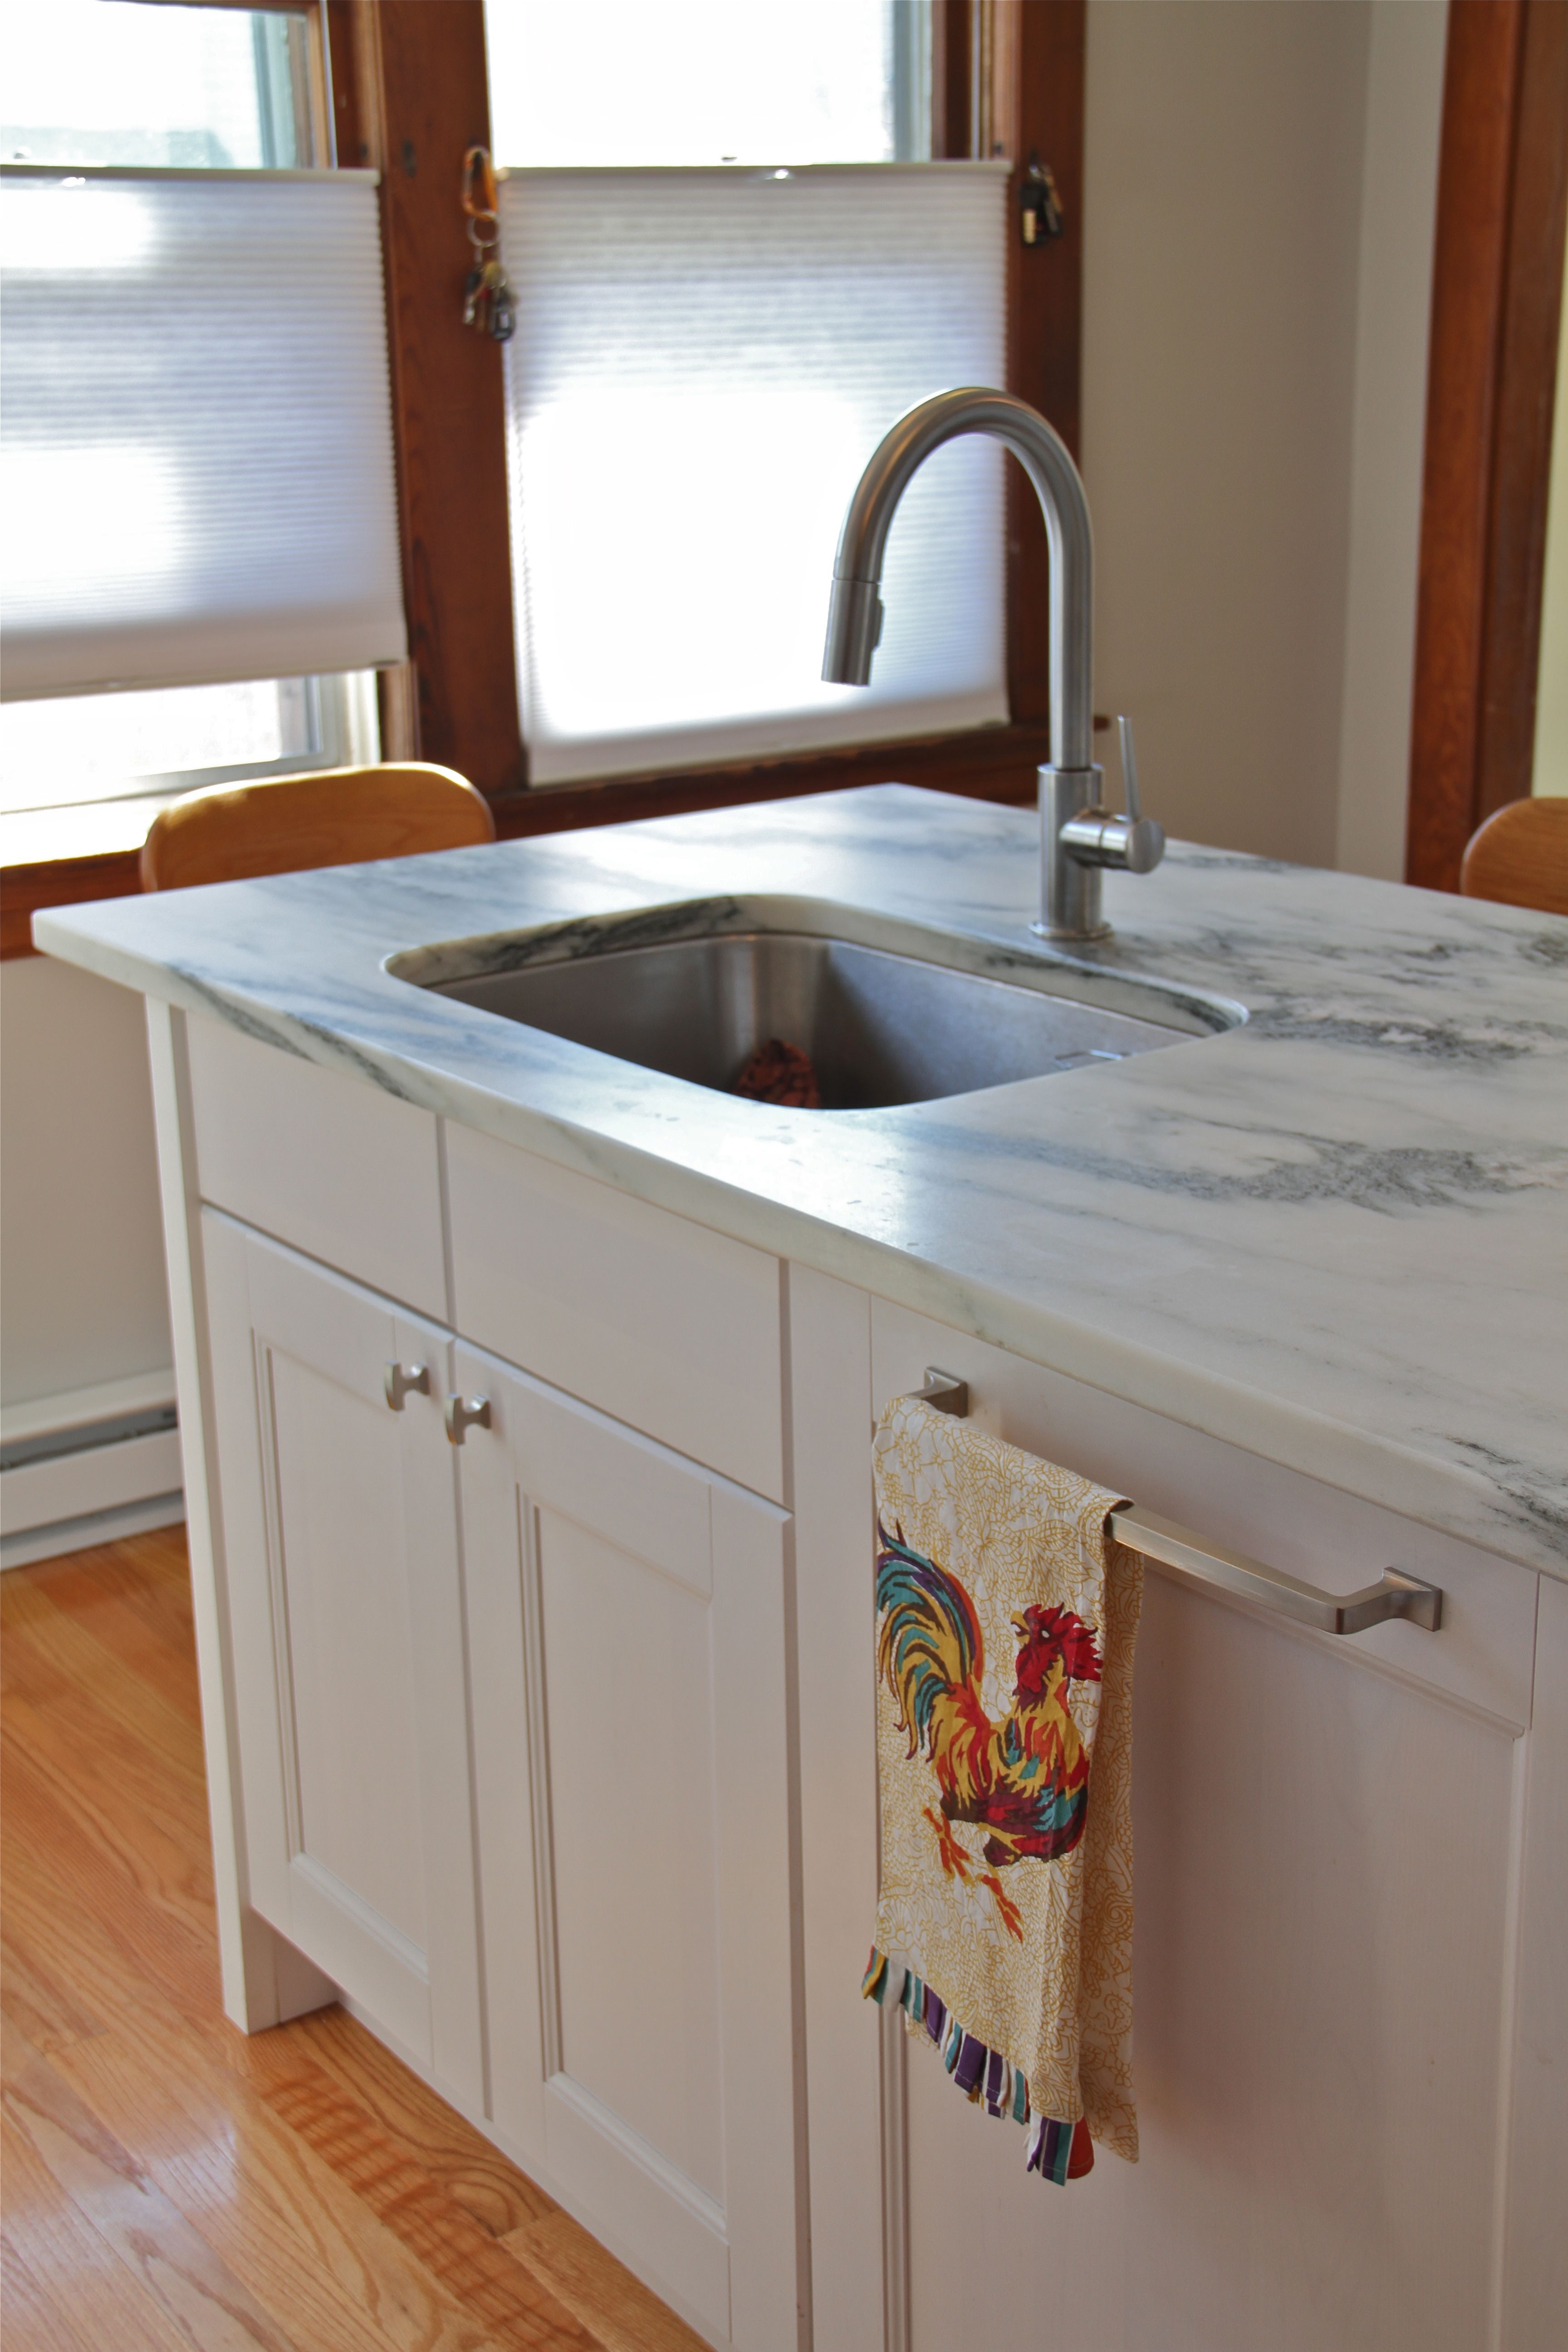 AFTER: Fully integrated dishwasher with cabinet panel, undermount sink, solid stone countertops. Ahhhh.